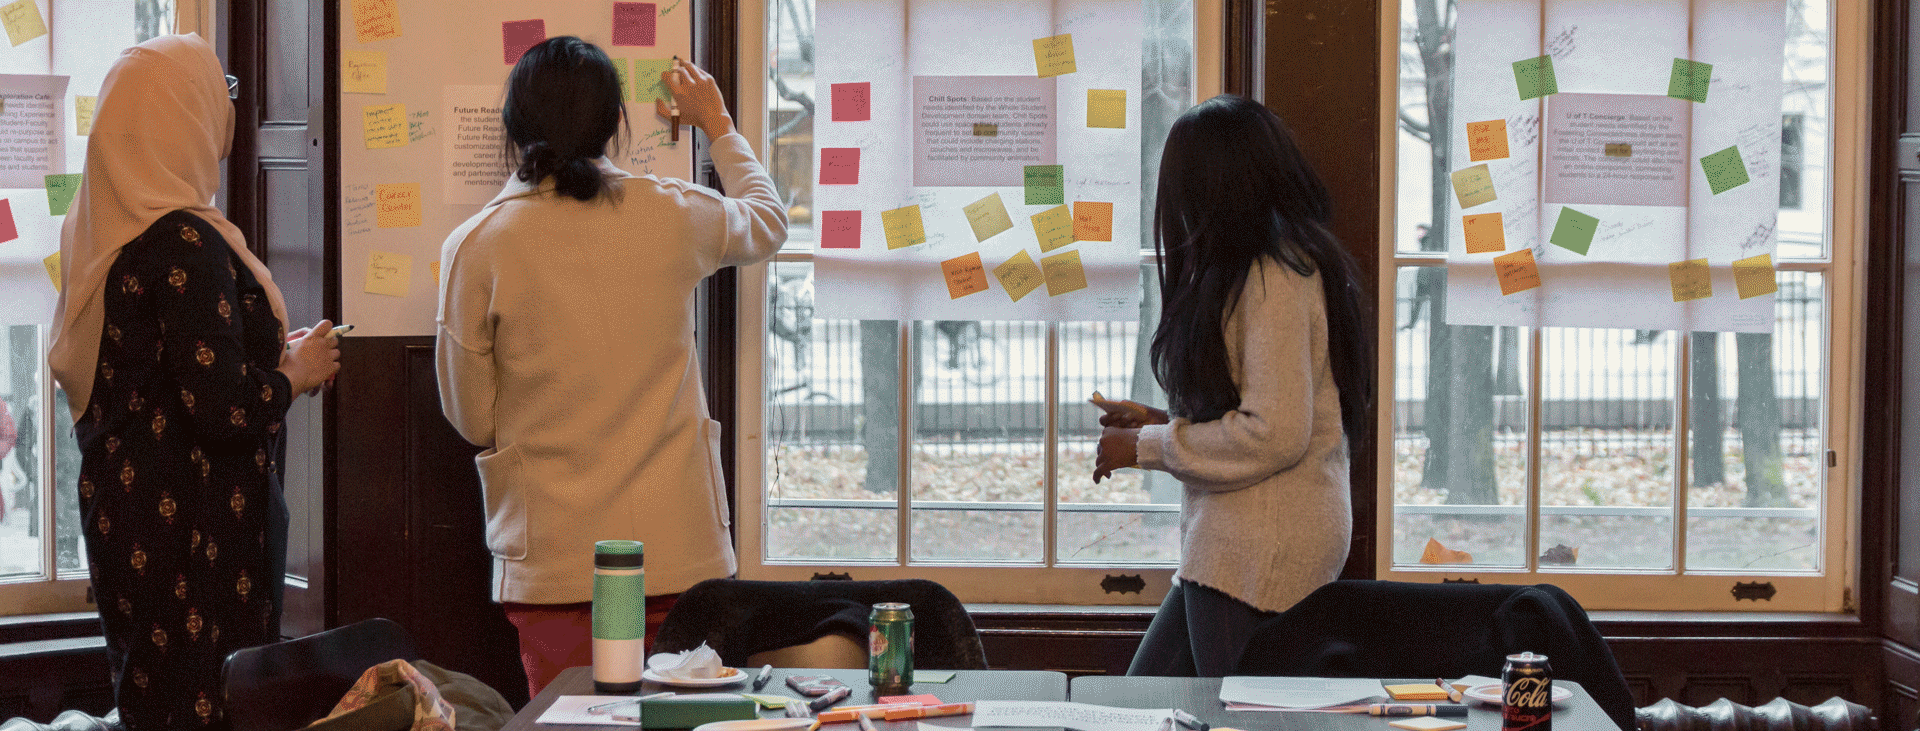 Three students design thinking with post it notes